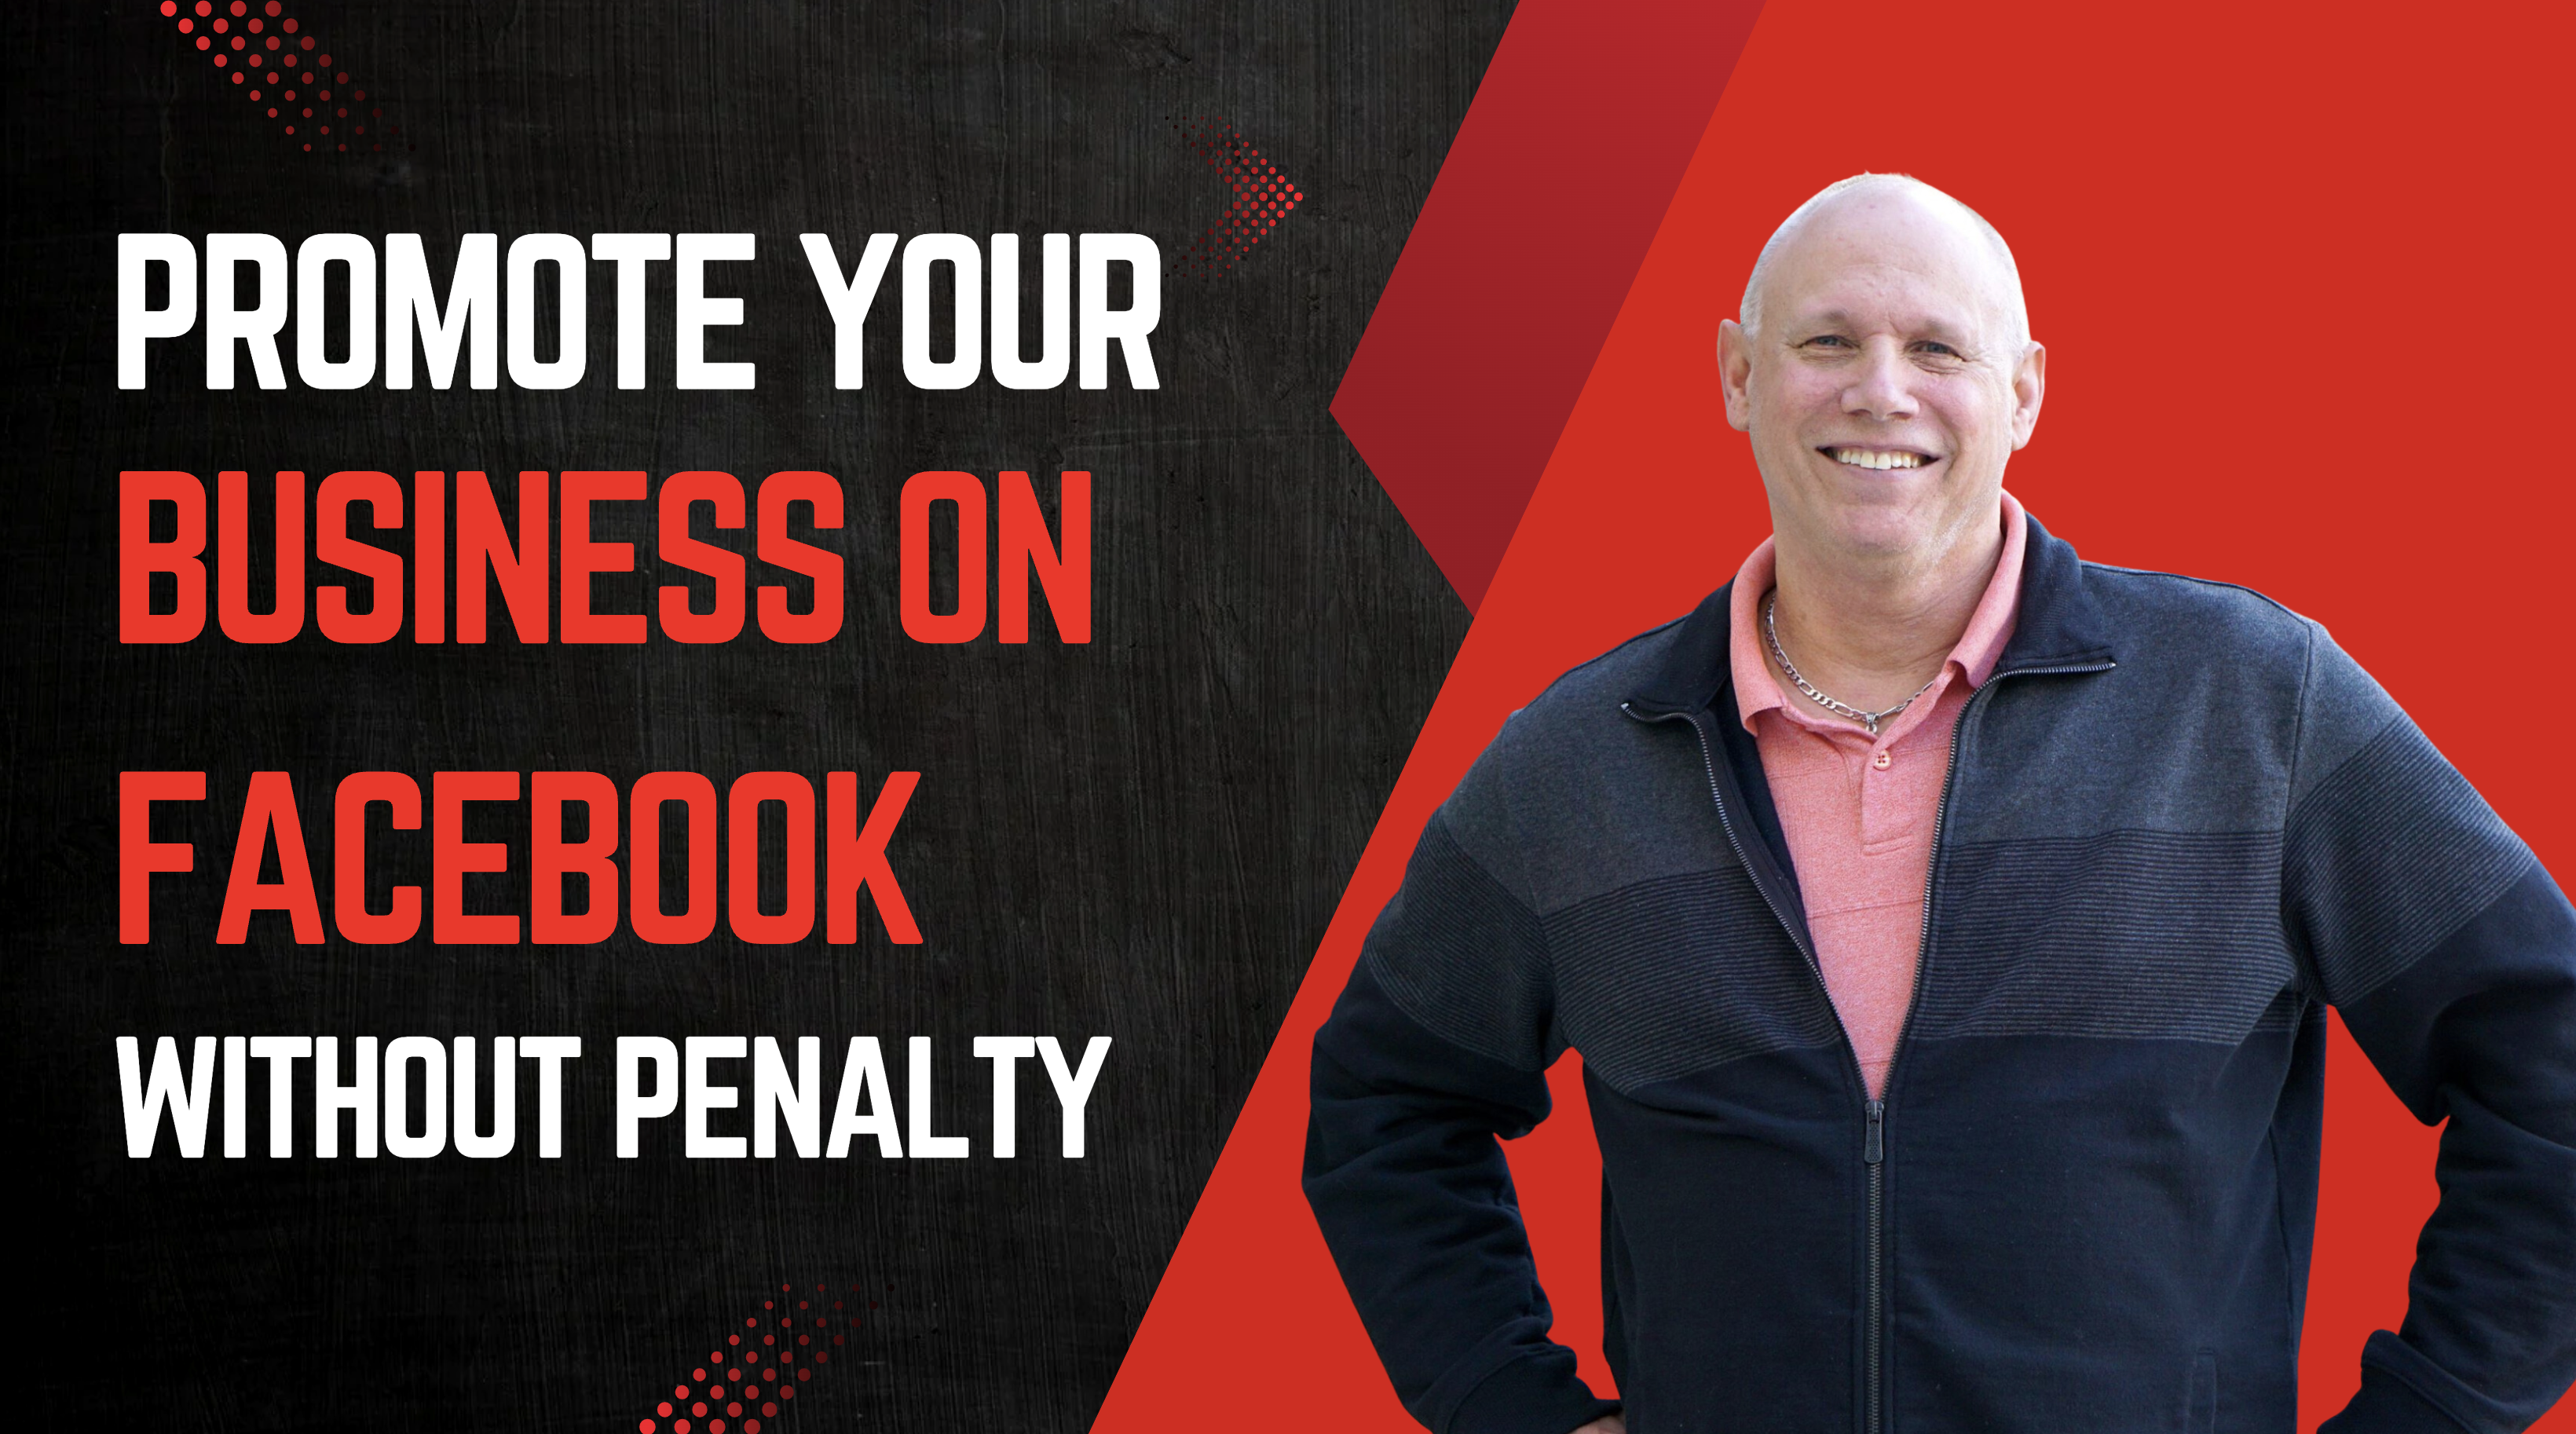 5 Places to Promote Your Business on Facebook Without Hurting Your Visibility